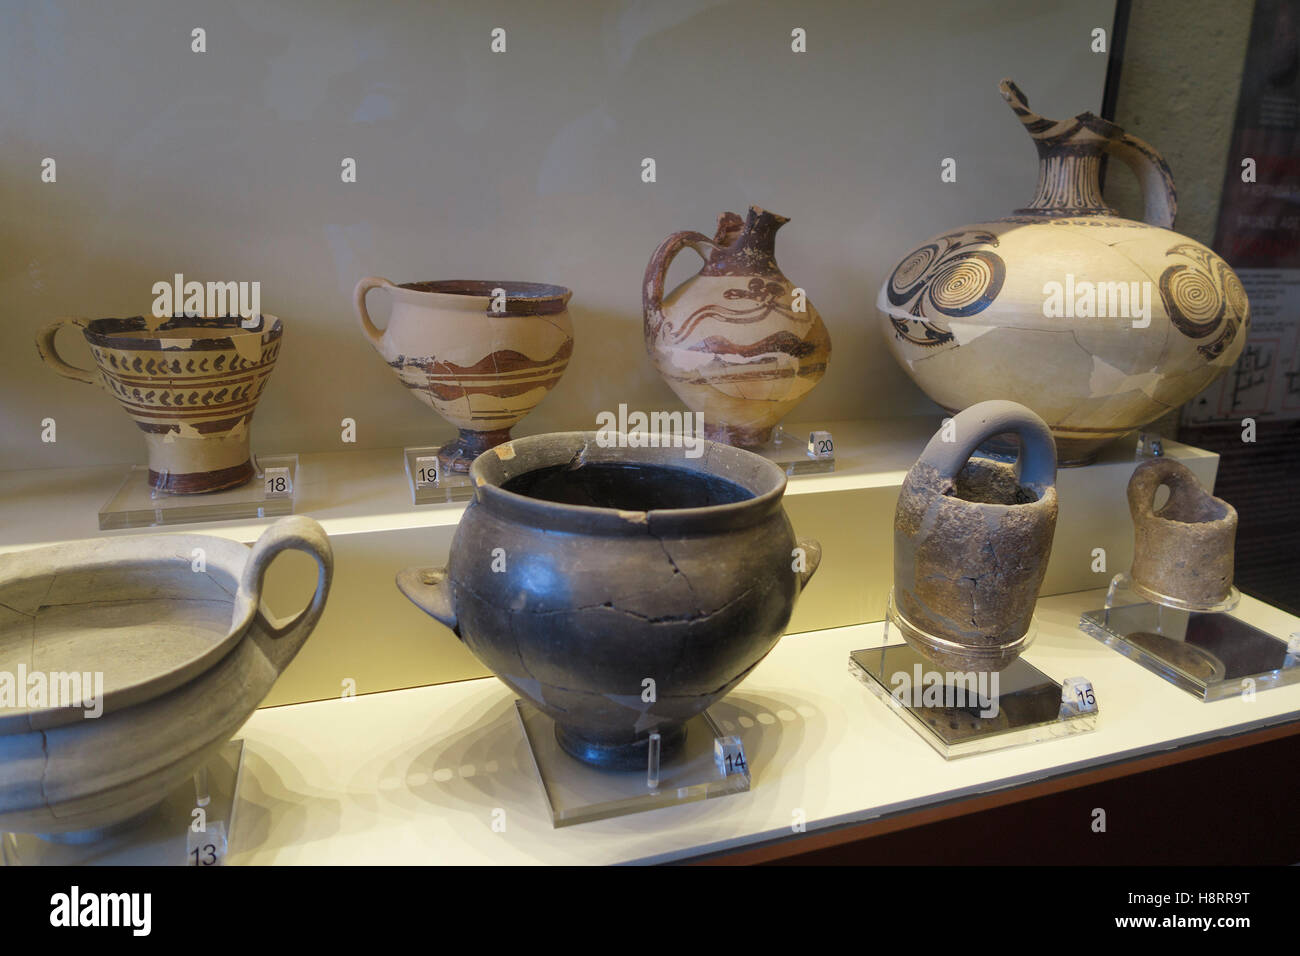 Pottery at the Archaeological Museum of Ancient Corinth, Corinth, Greece, Europe Stock Photo